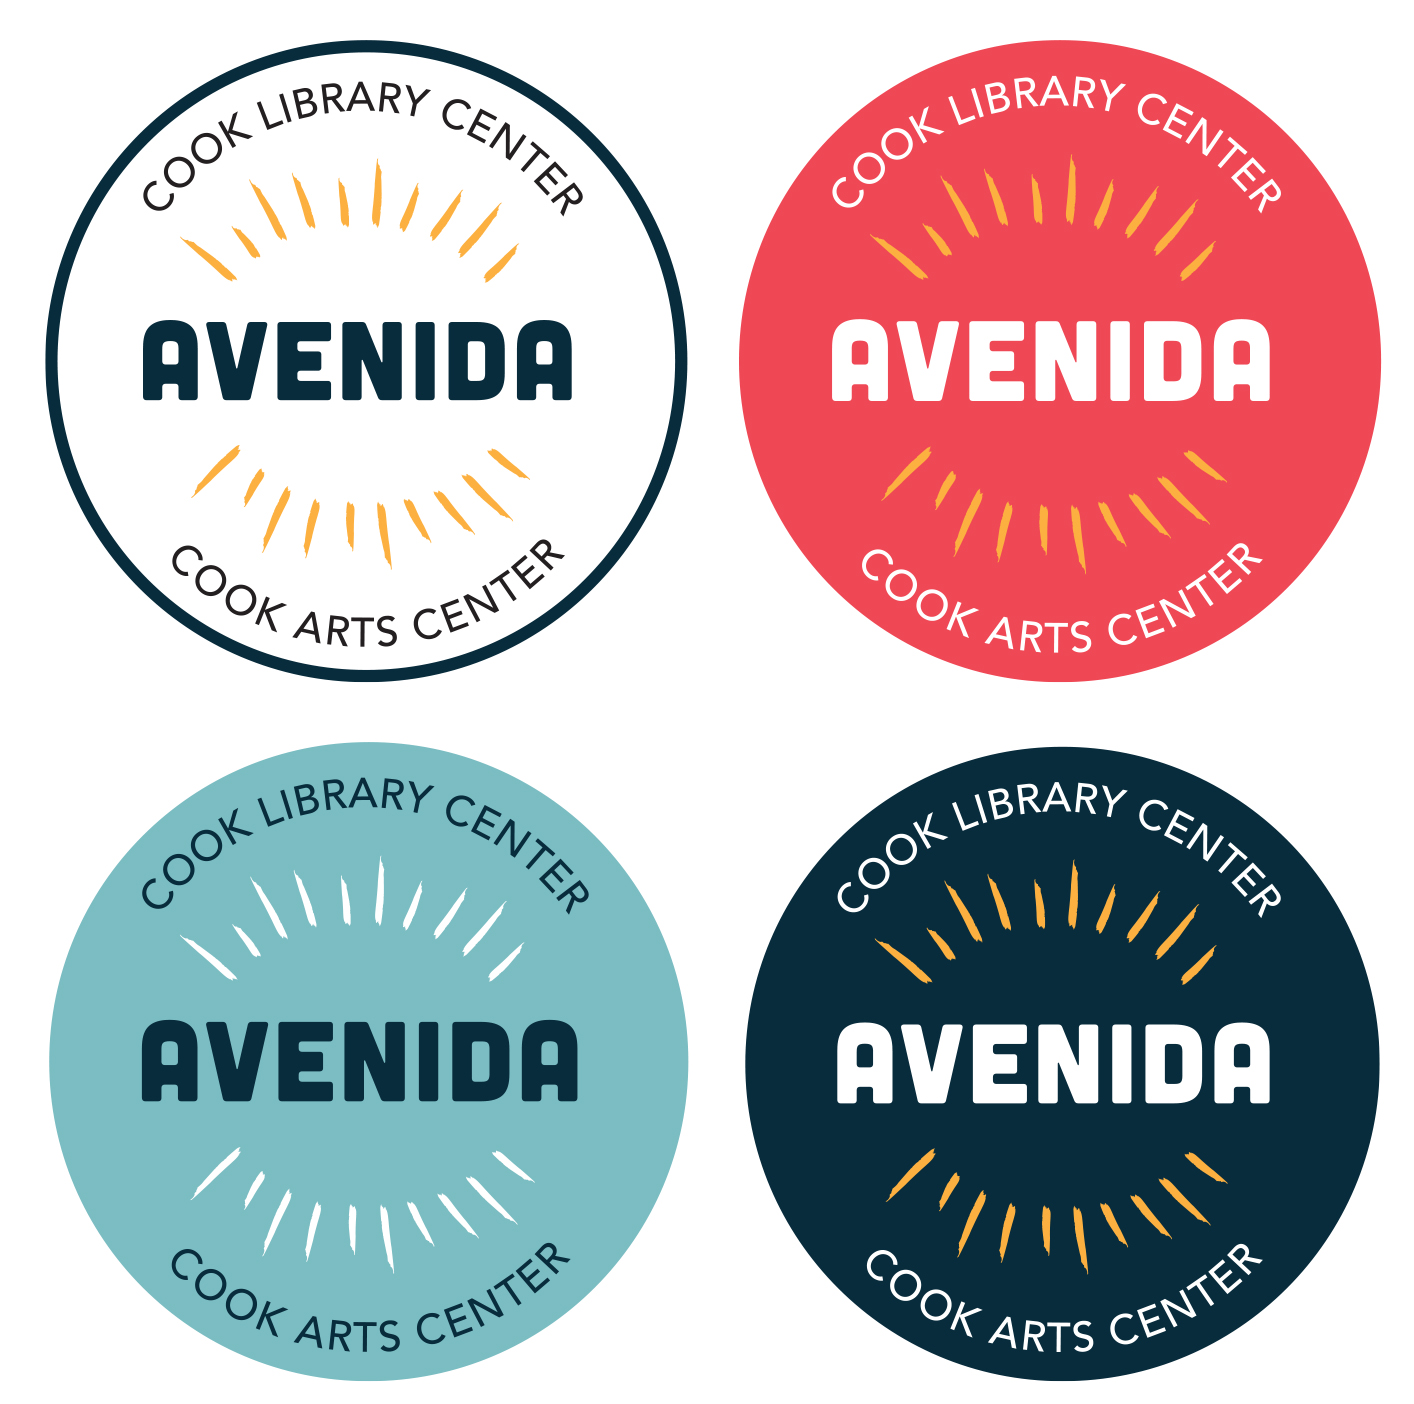 Badge-like logo showing Avenida Cook Library Center and Cook Arts Center.